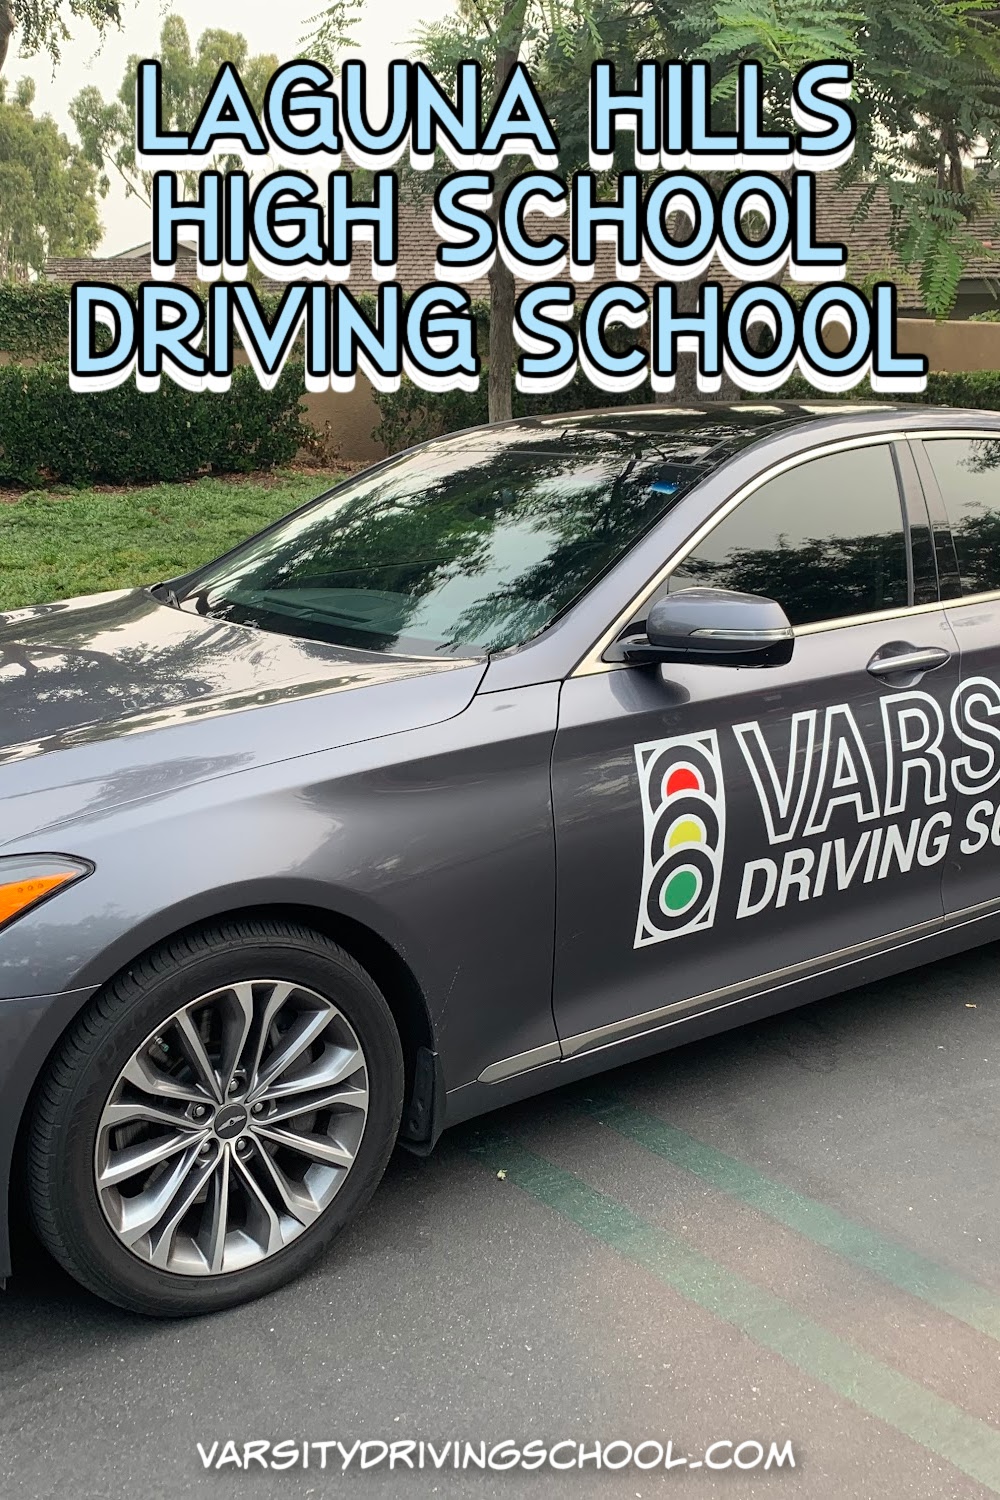 Varsity Driving School provides students with the best Laguna Hills High School behind the wheel training.